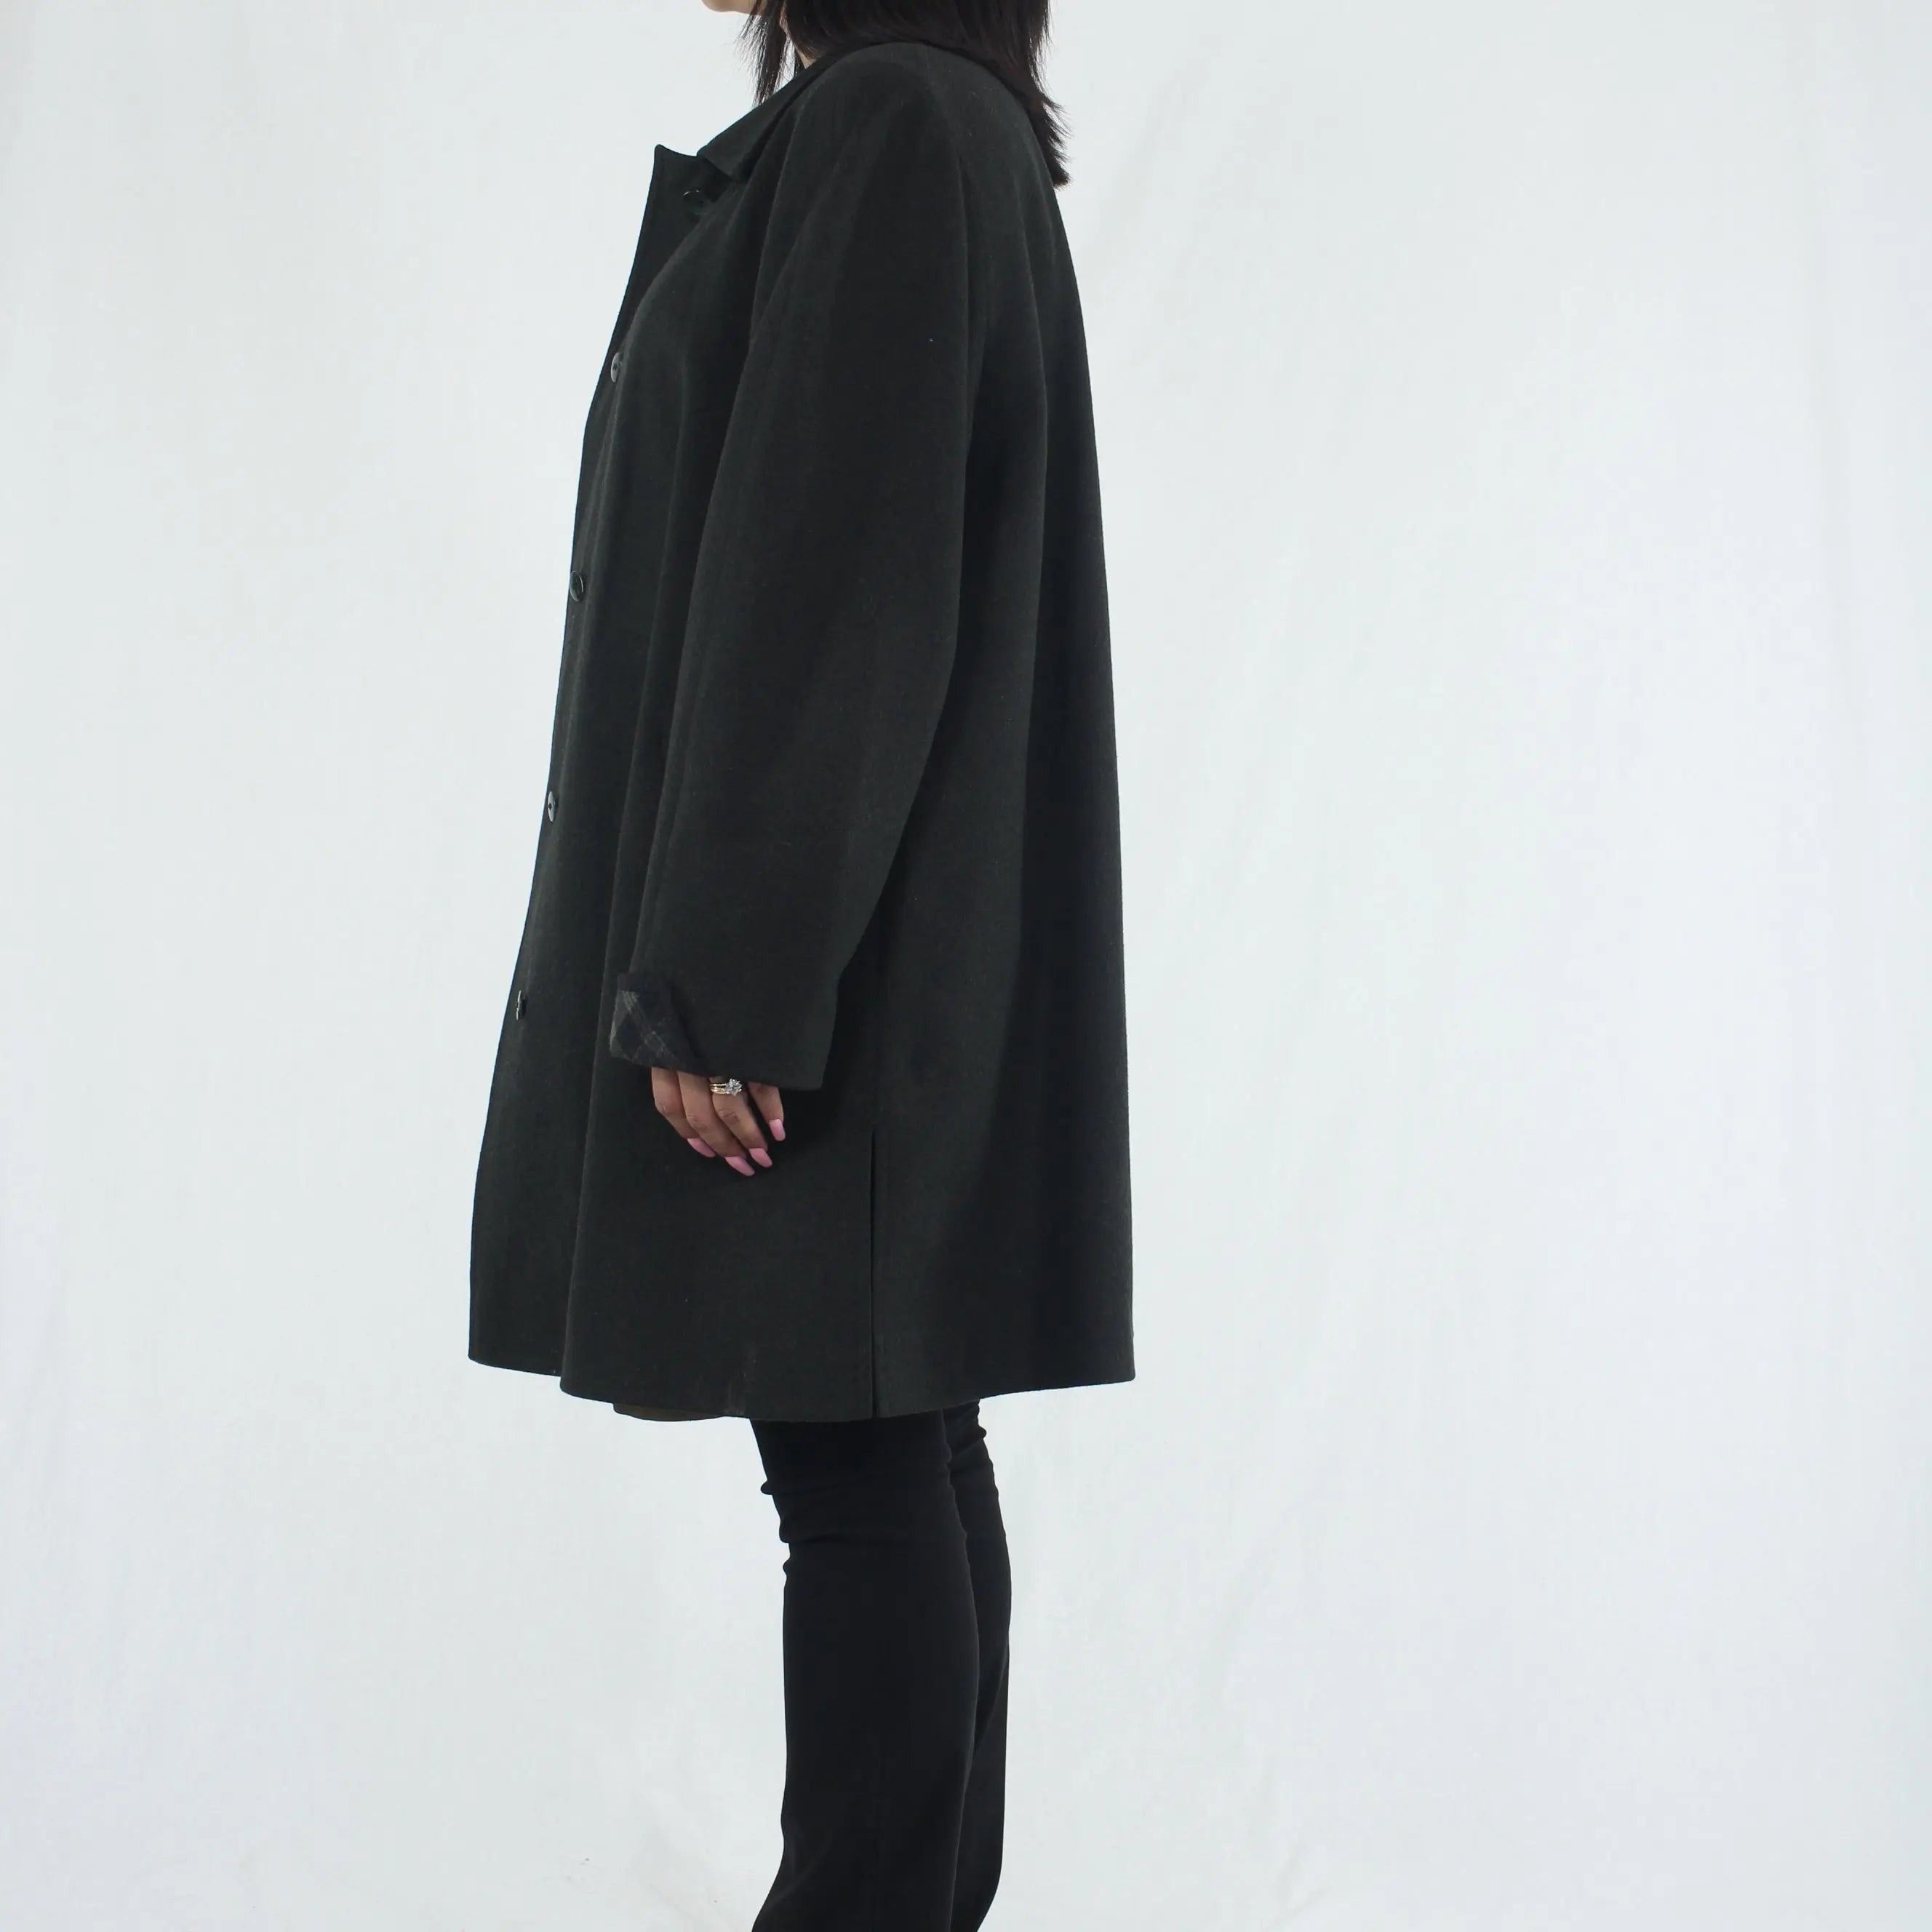 Marcona - Cashmere Coat by Marcona- ThriftTale.com - Vintage and second handclothing